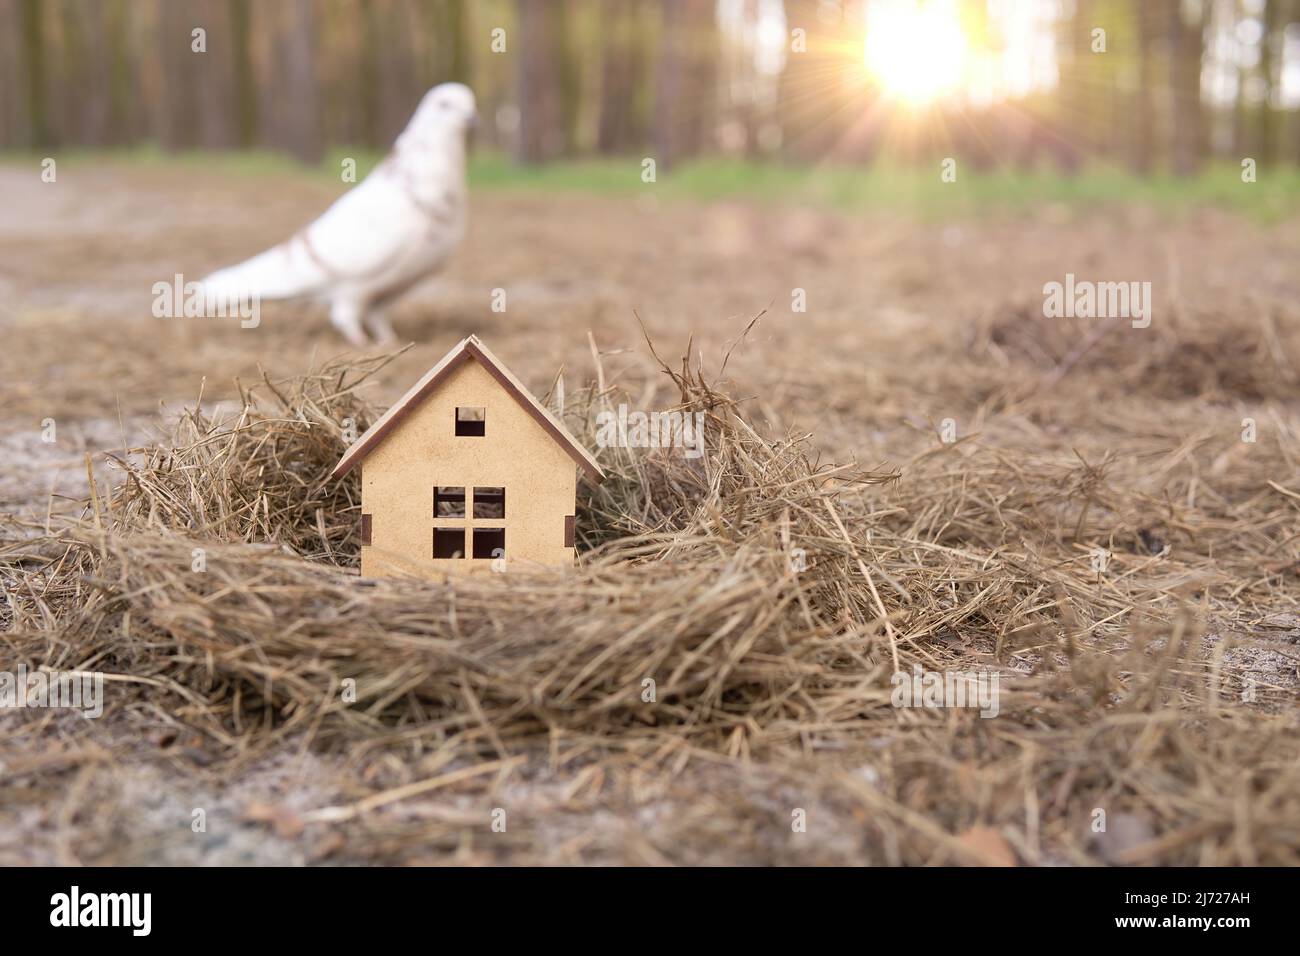 Tiny wooden house in a bird's nest in the woods at sunset. Pigeon choosing a perfect family home. Stock Photo